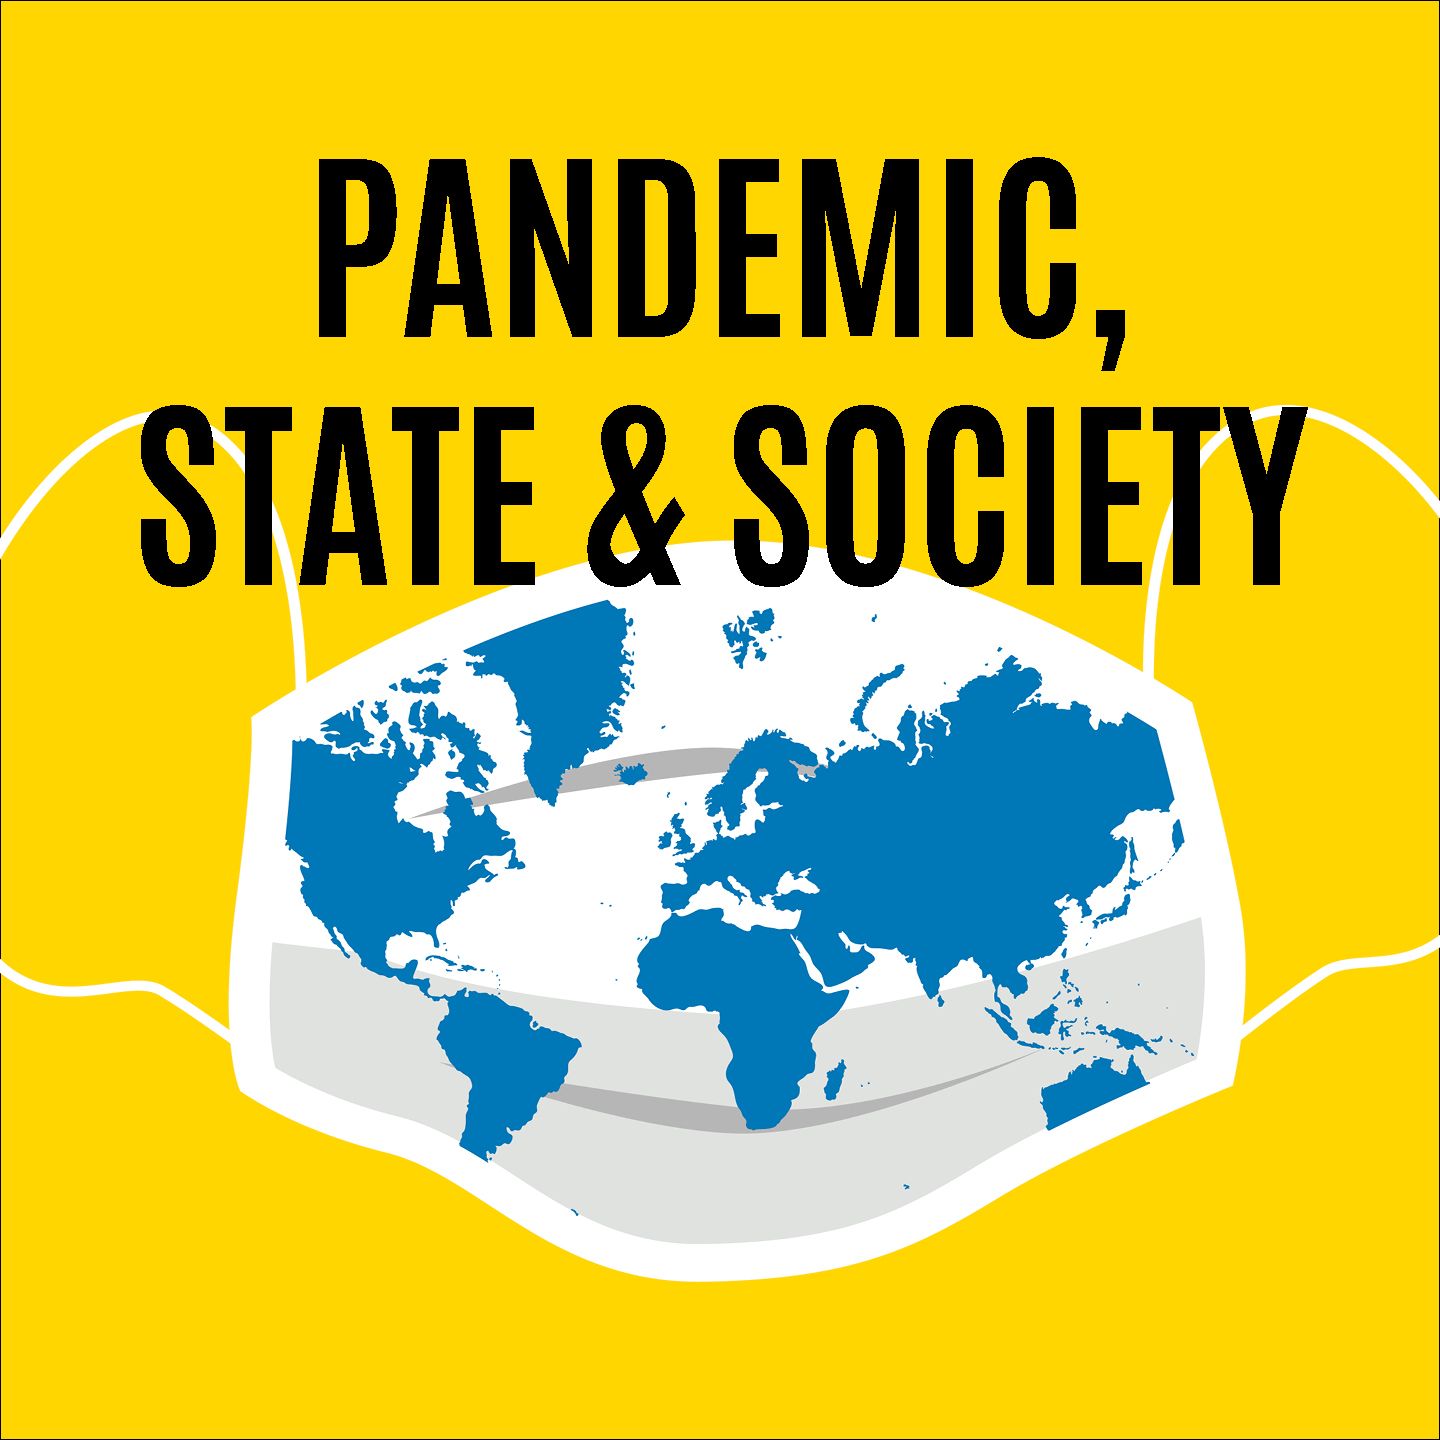 Pandemic, State, and Society webinar series September 18 and 25